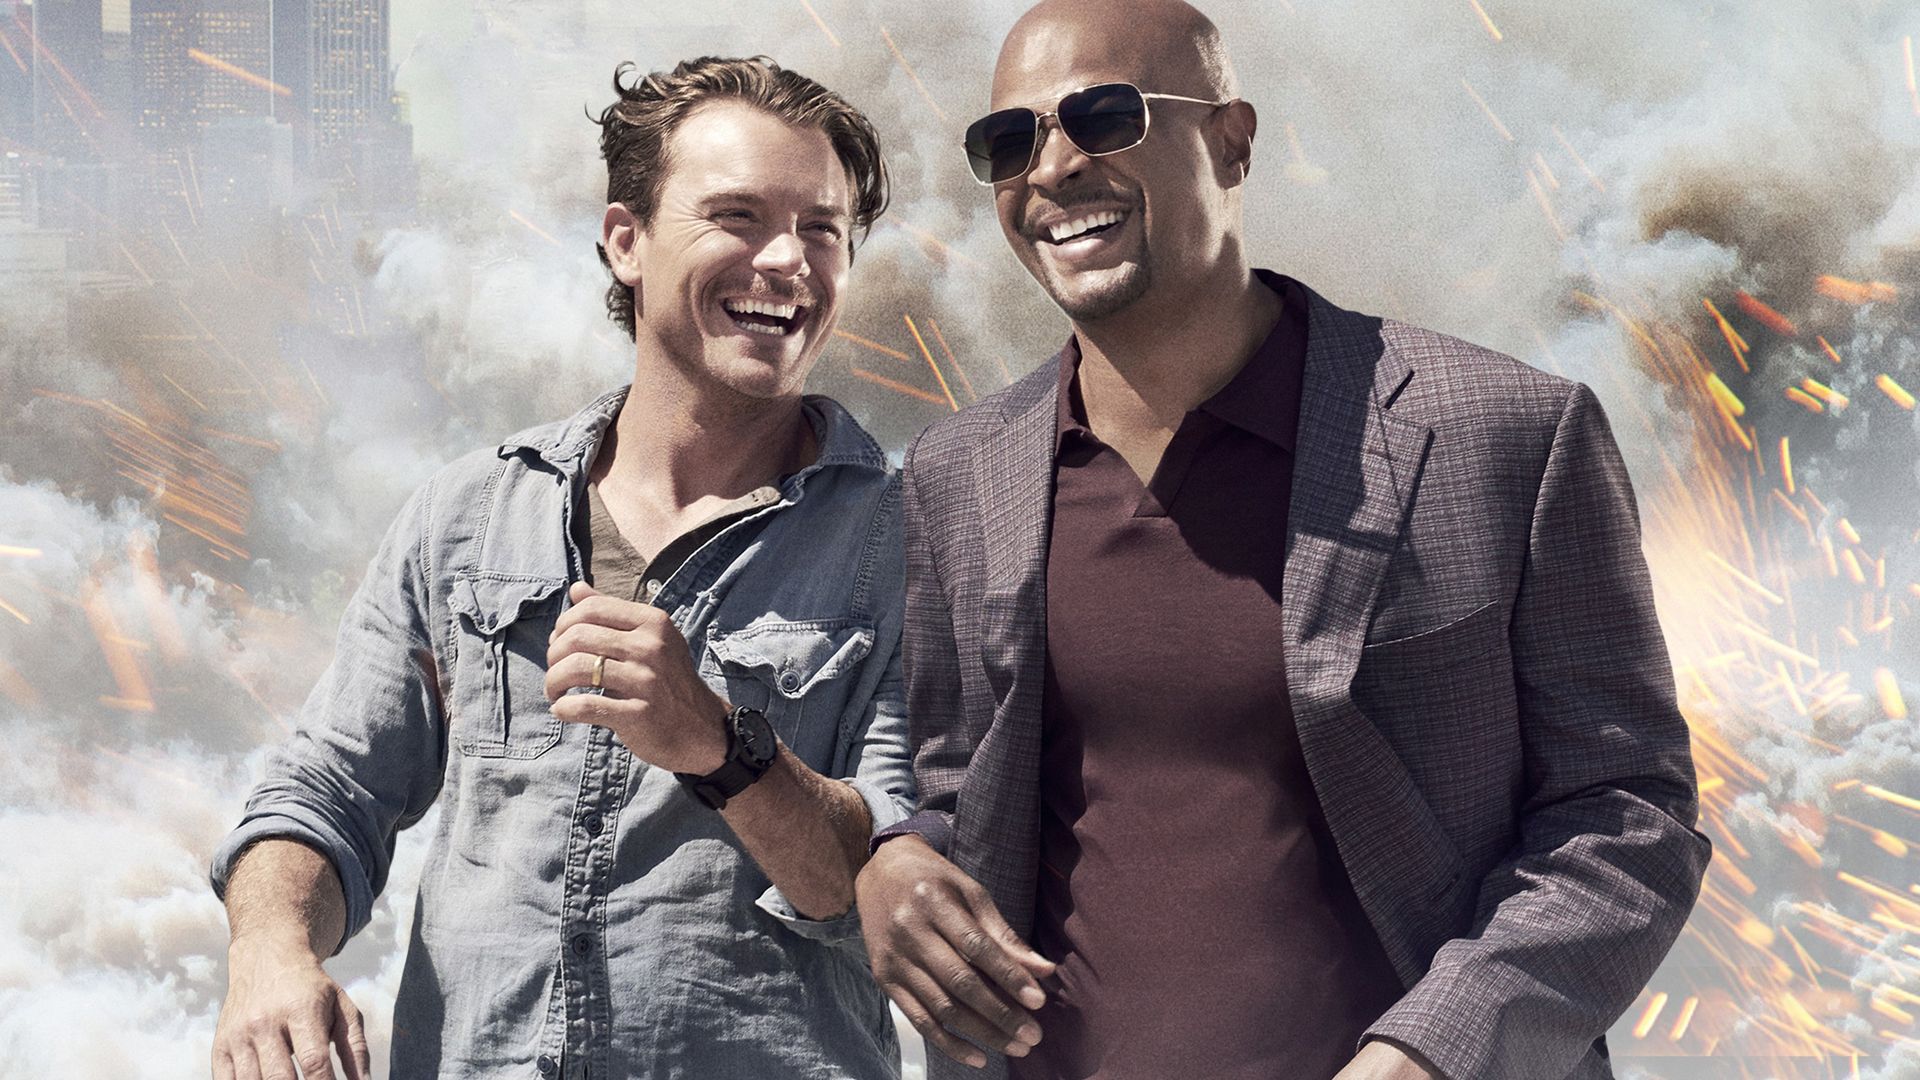 Lethal Weapon e The Shannara Chronicles disponibili in Home Video